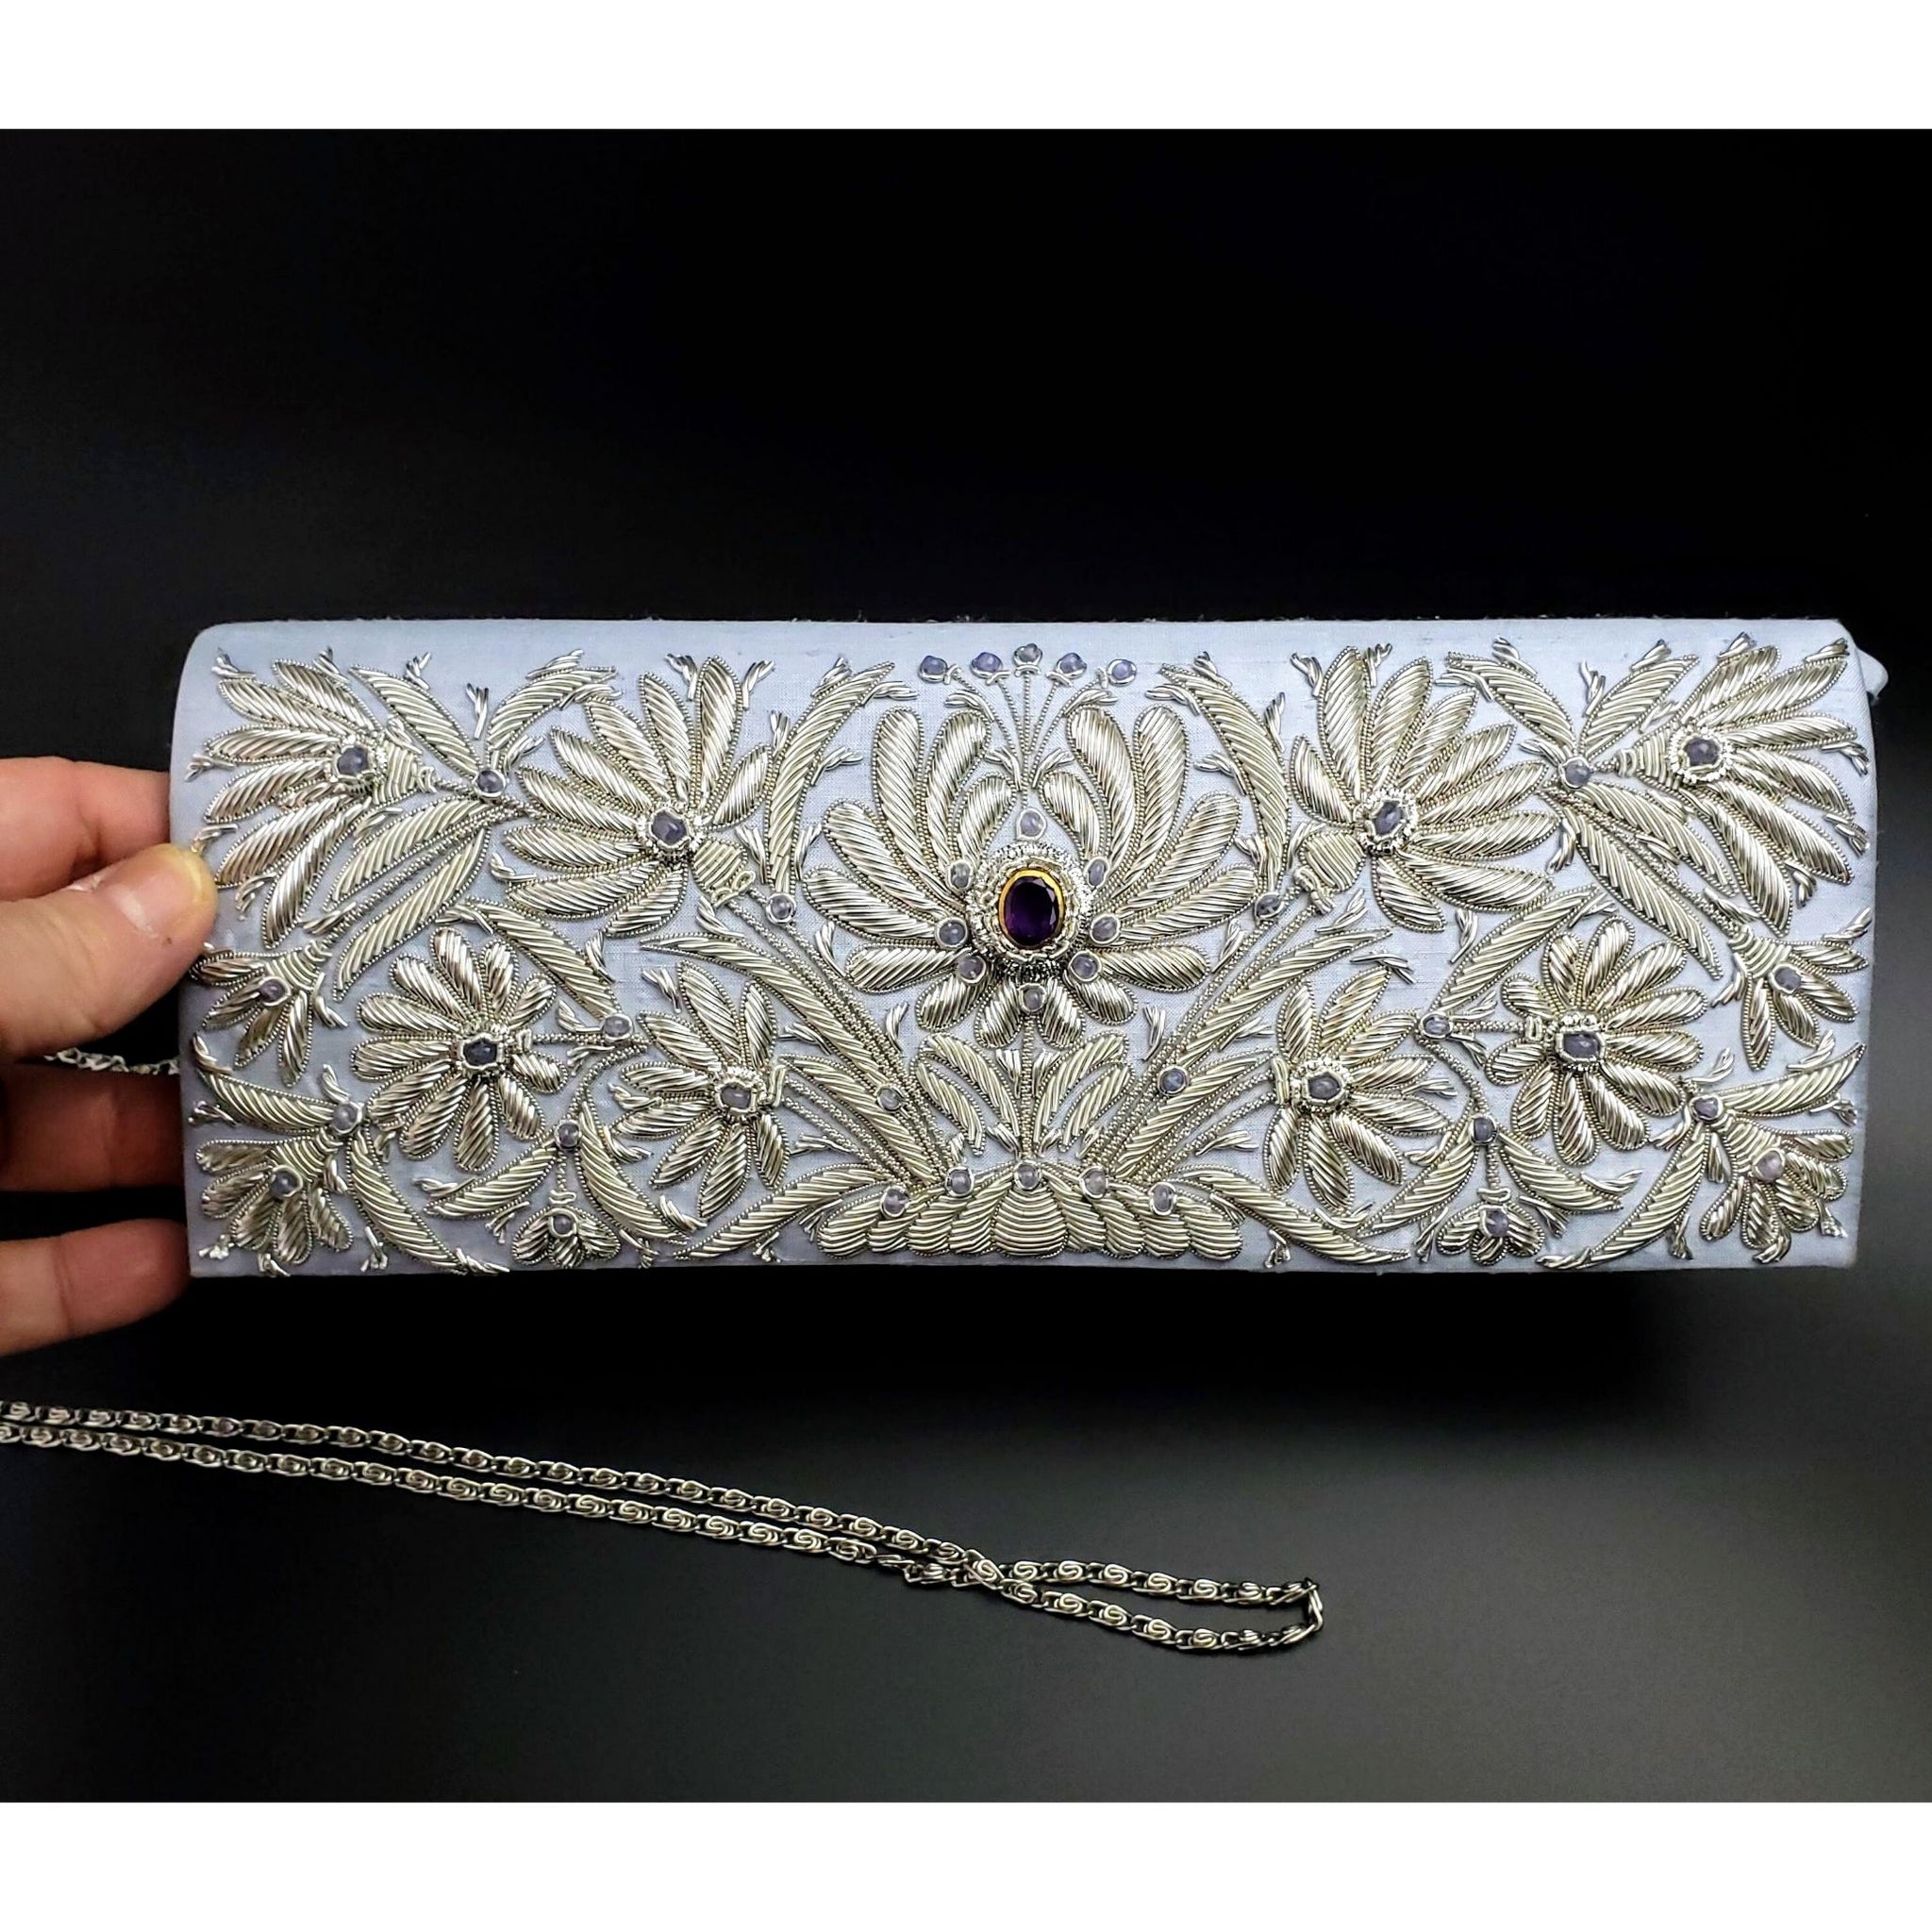 Custom Bridal Clutch - LARGER SIZE | Beth Ladd Collections